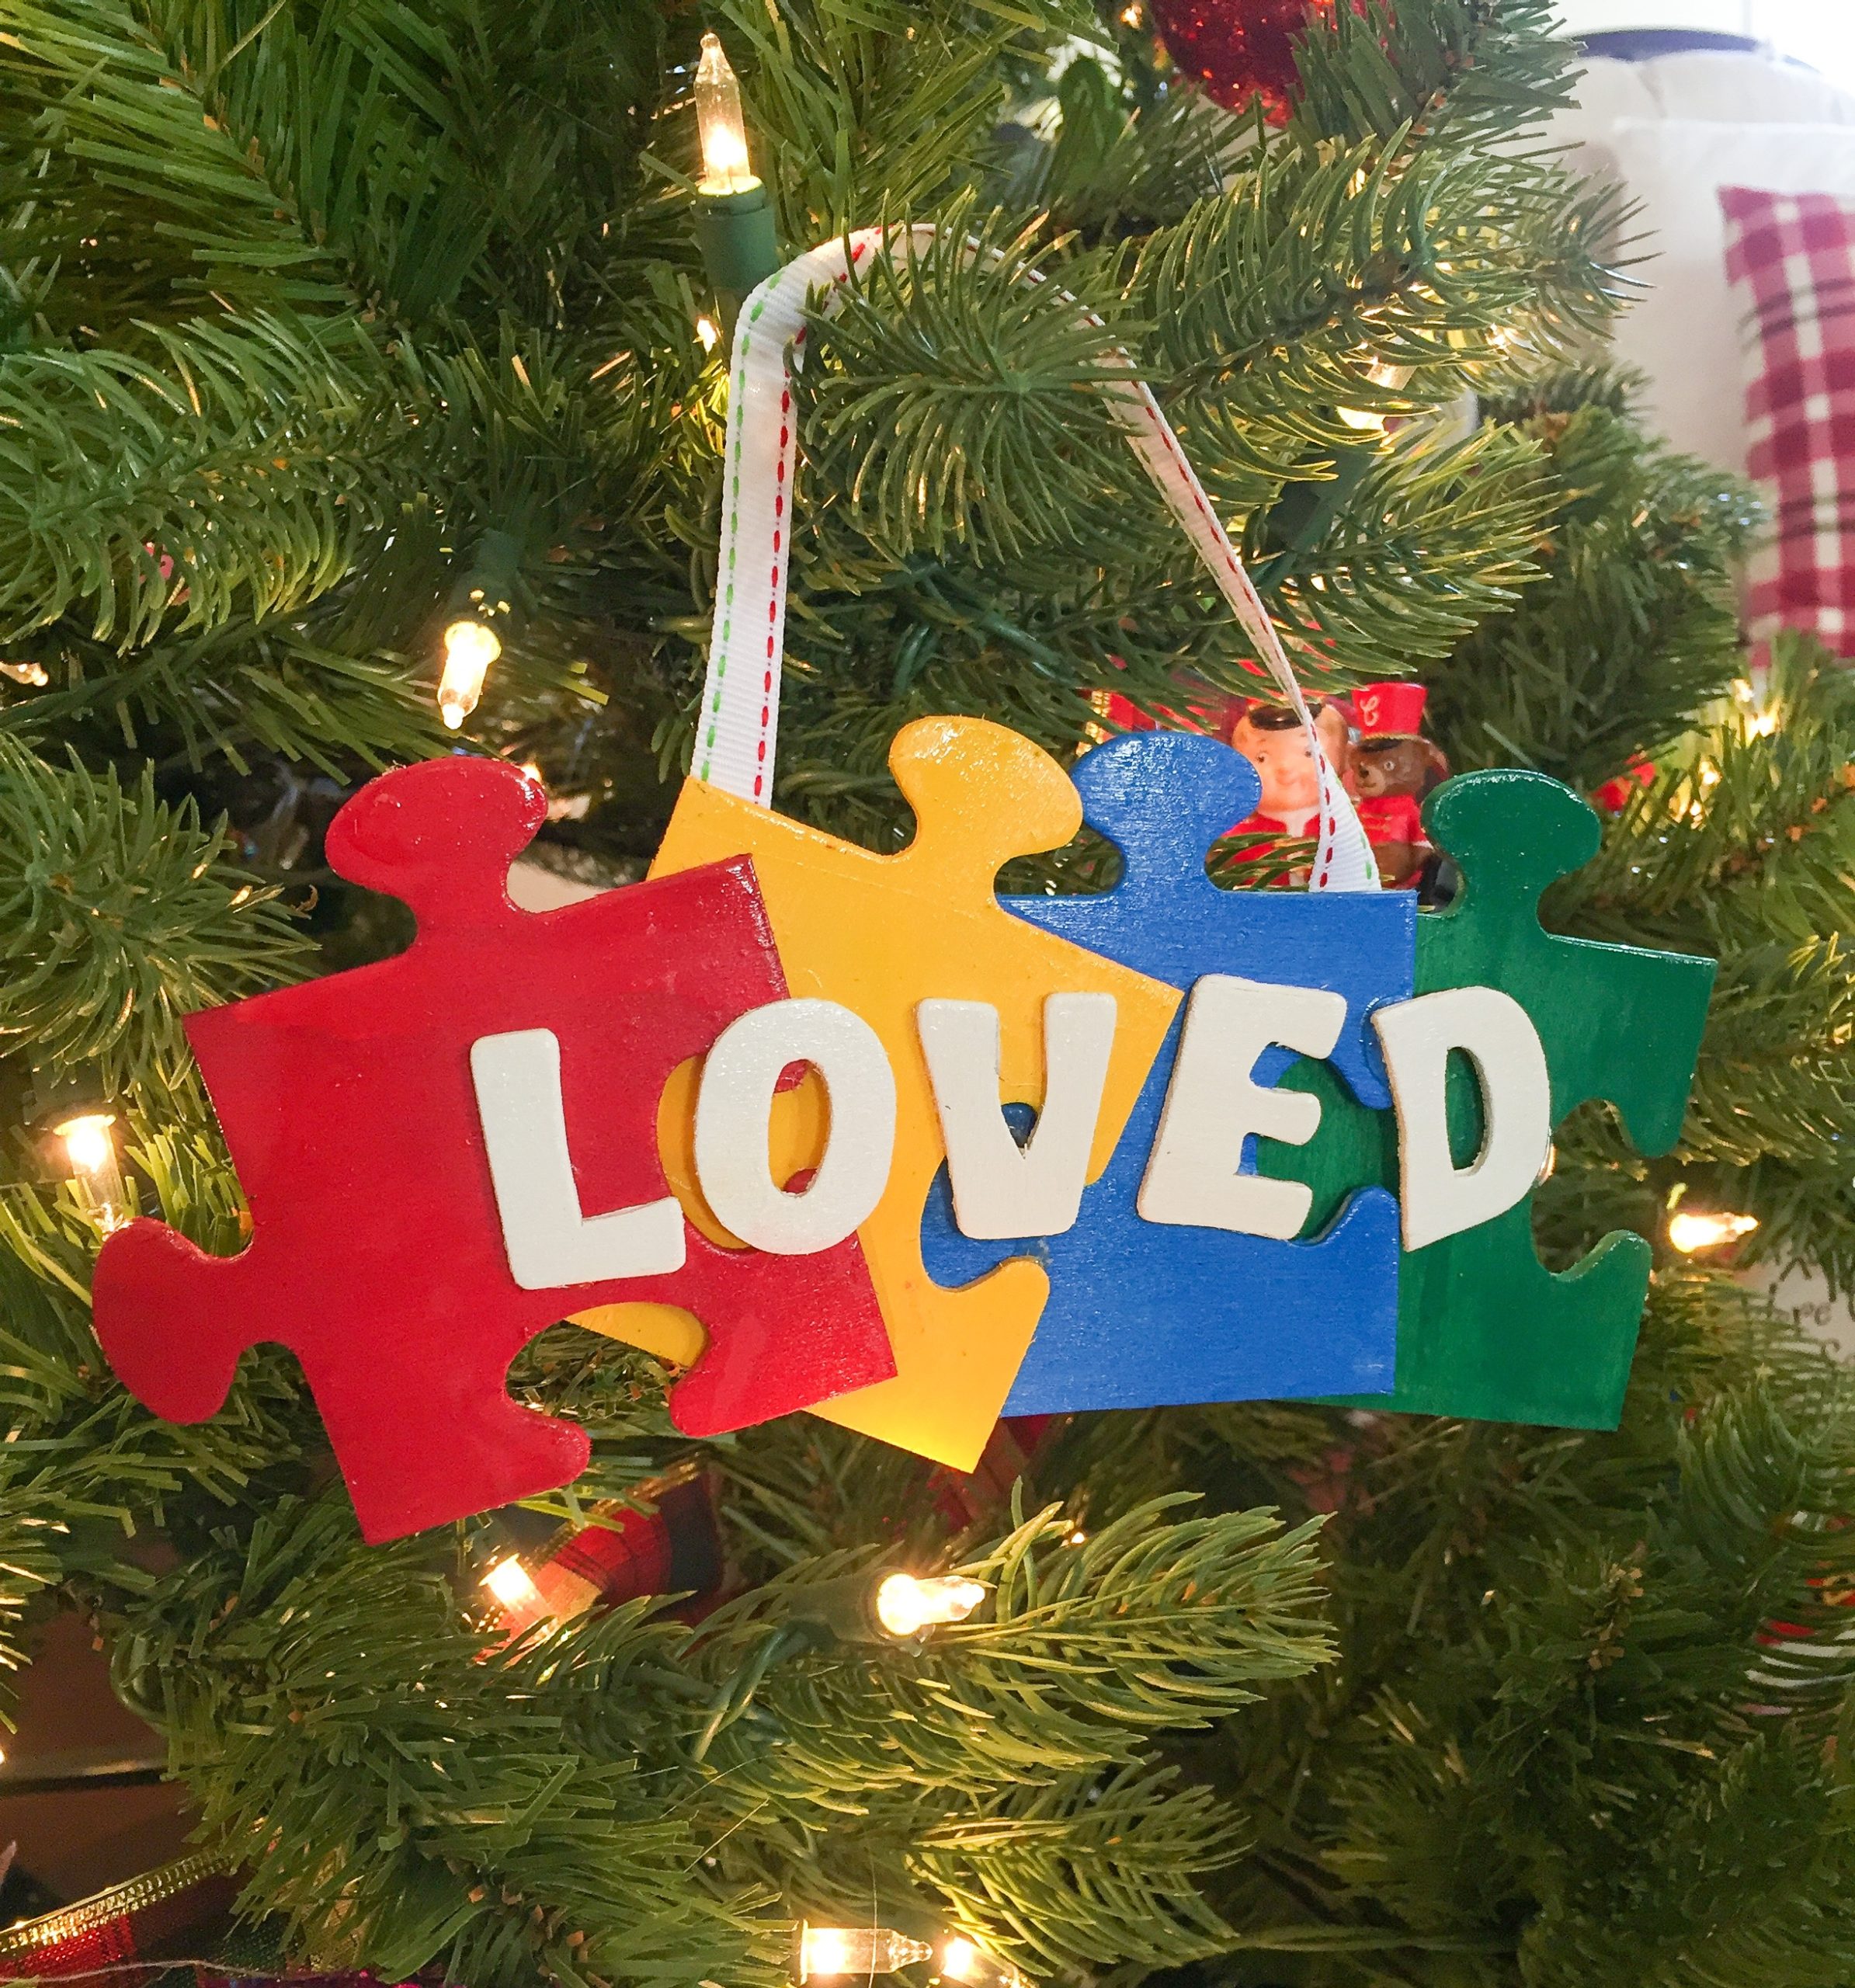 Autism Awareness Puzzle Heart Ornament For Personalization